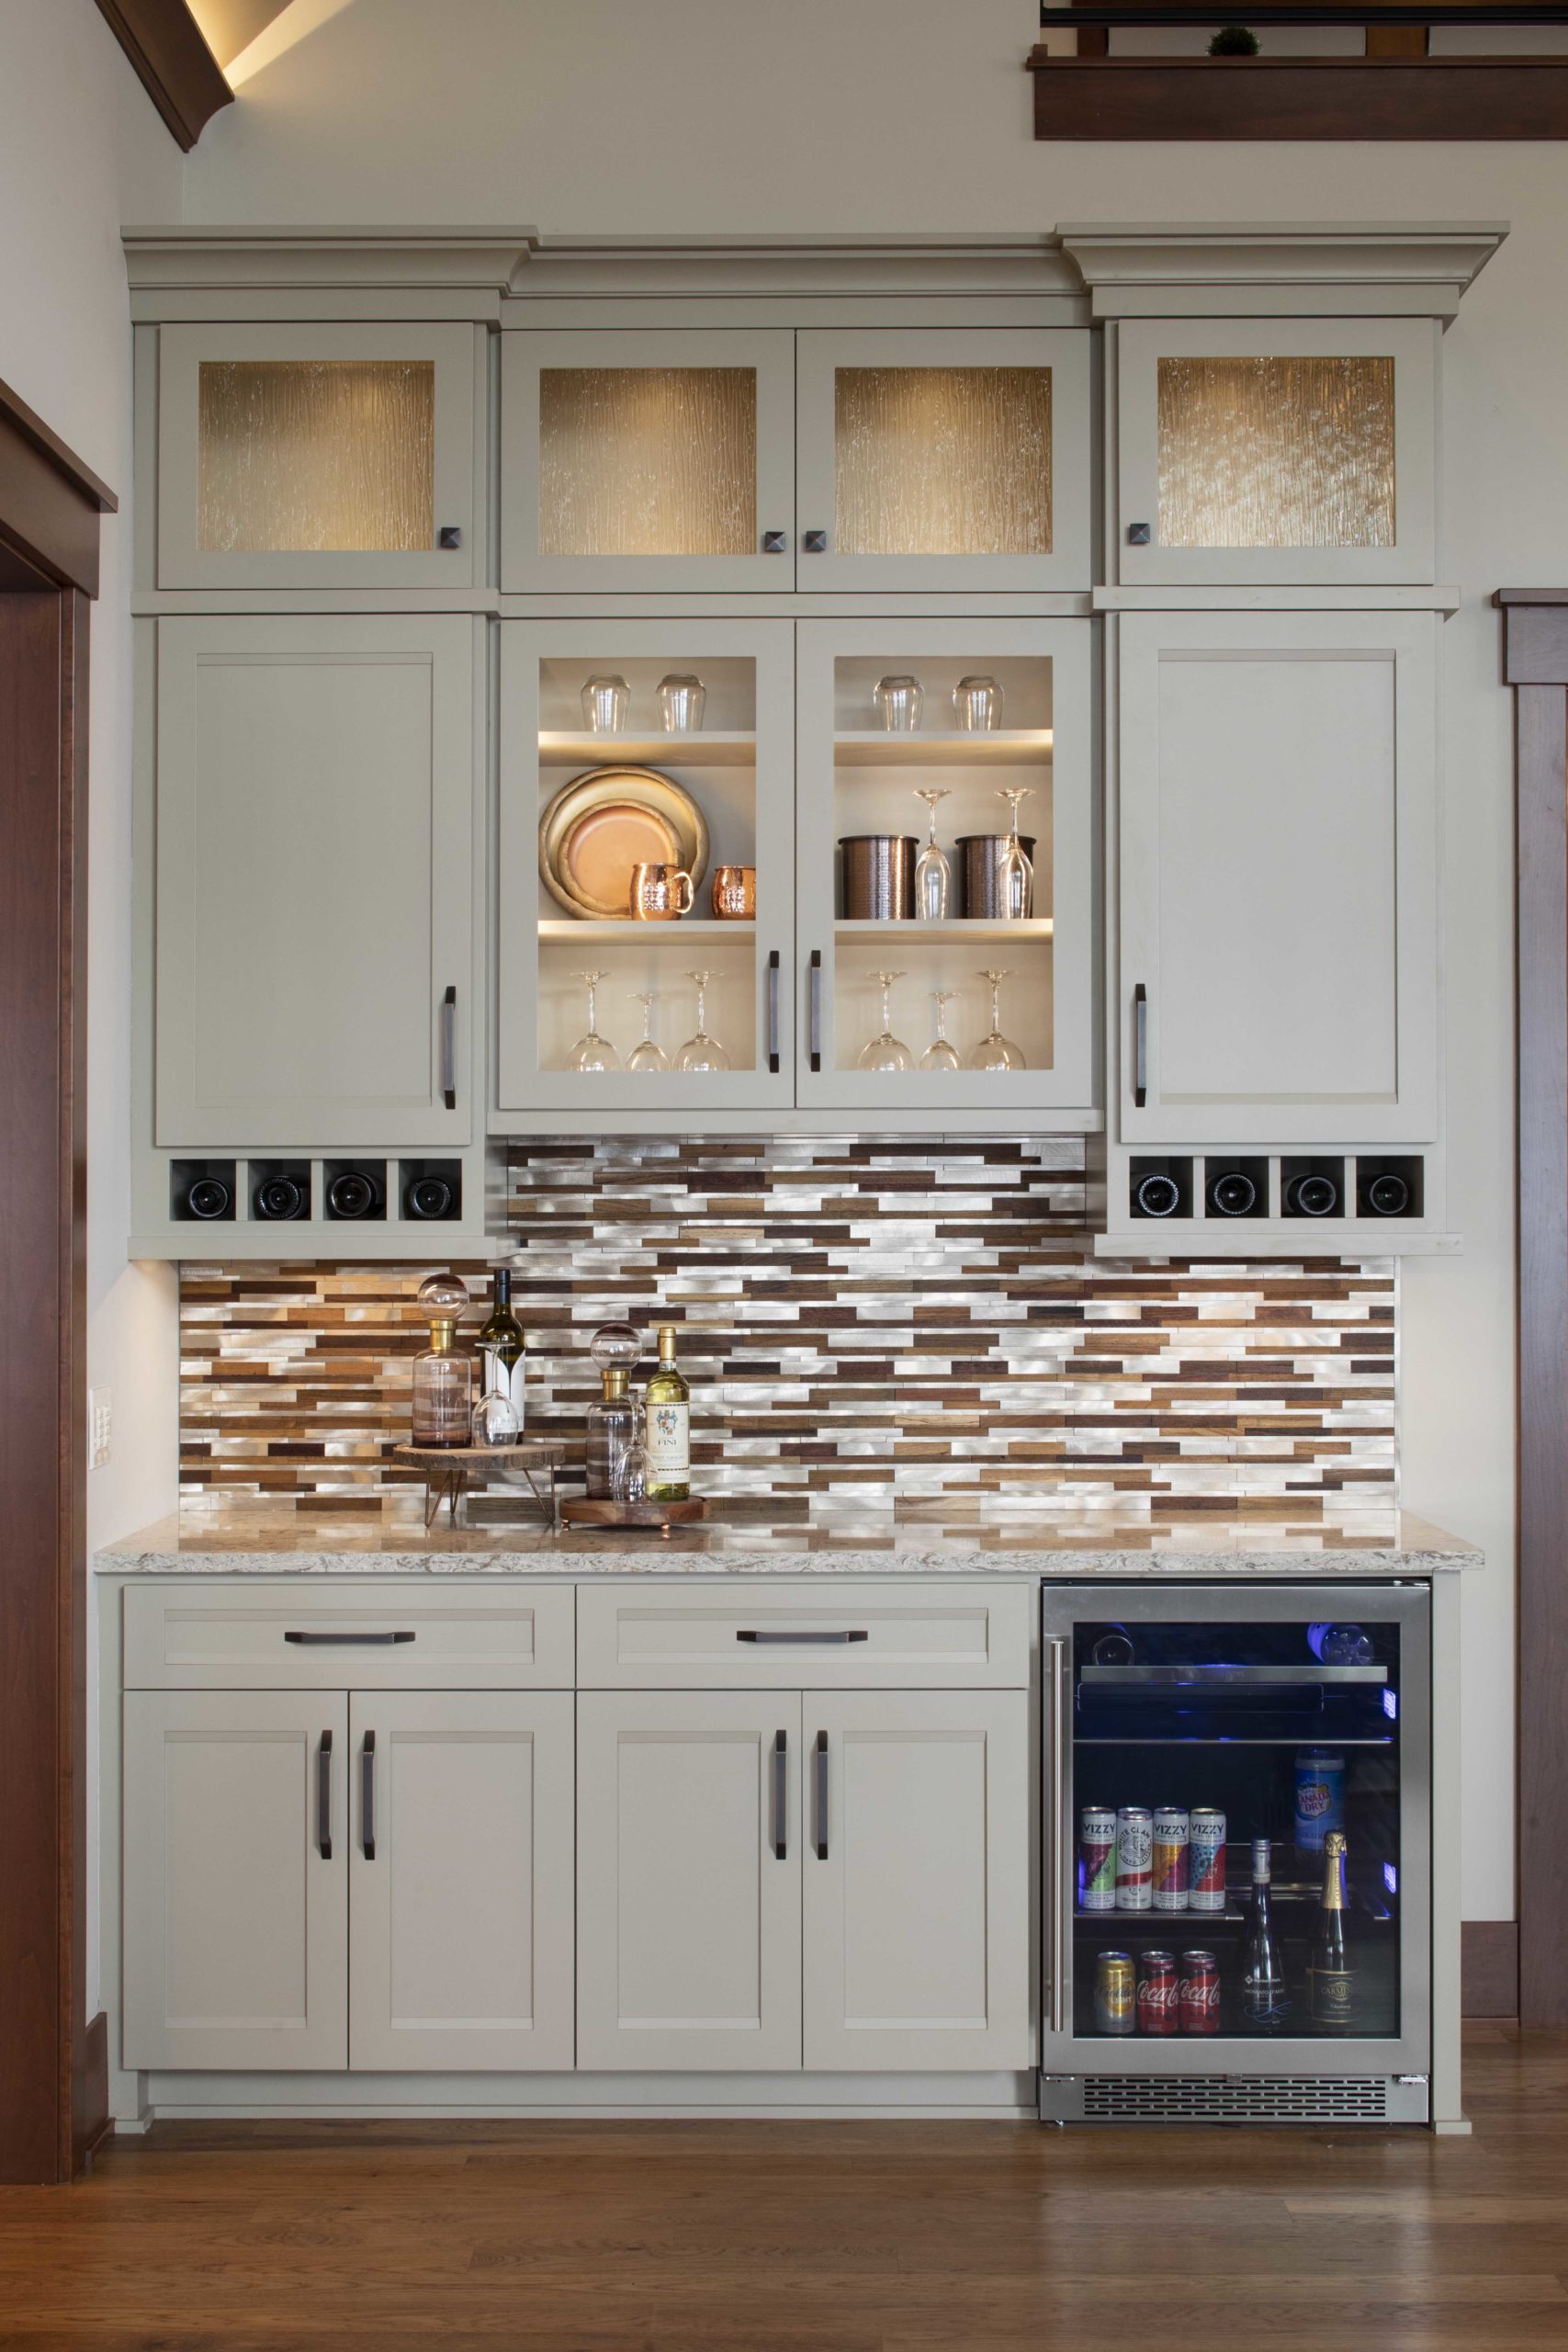 A kitchen with white cabinets and a custom home remodel, including a refrigerator.